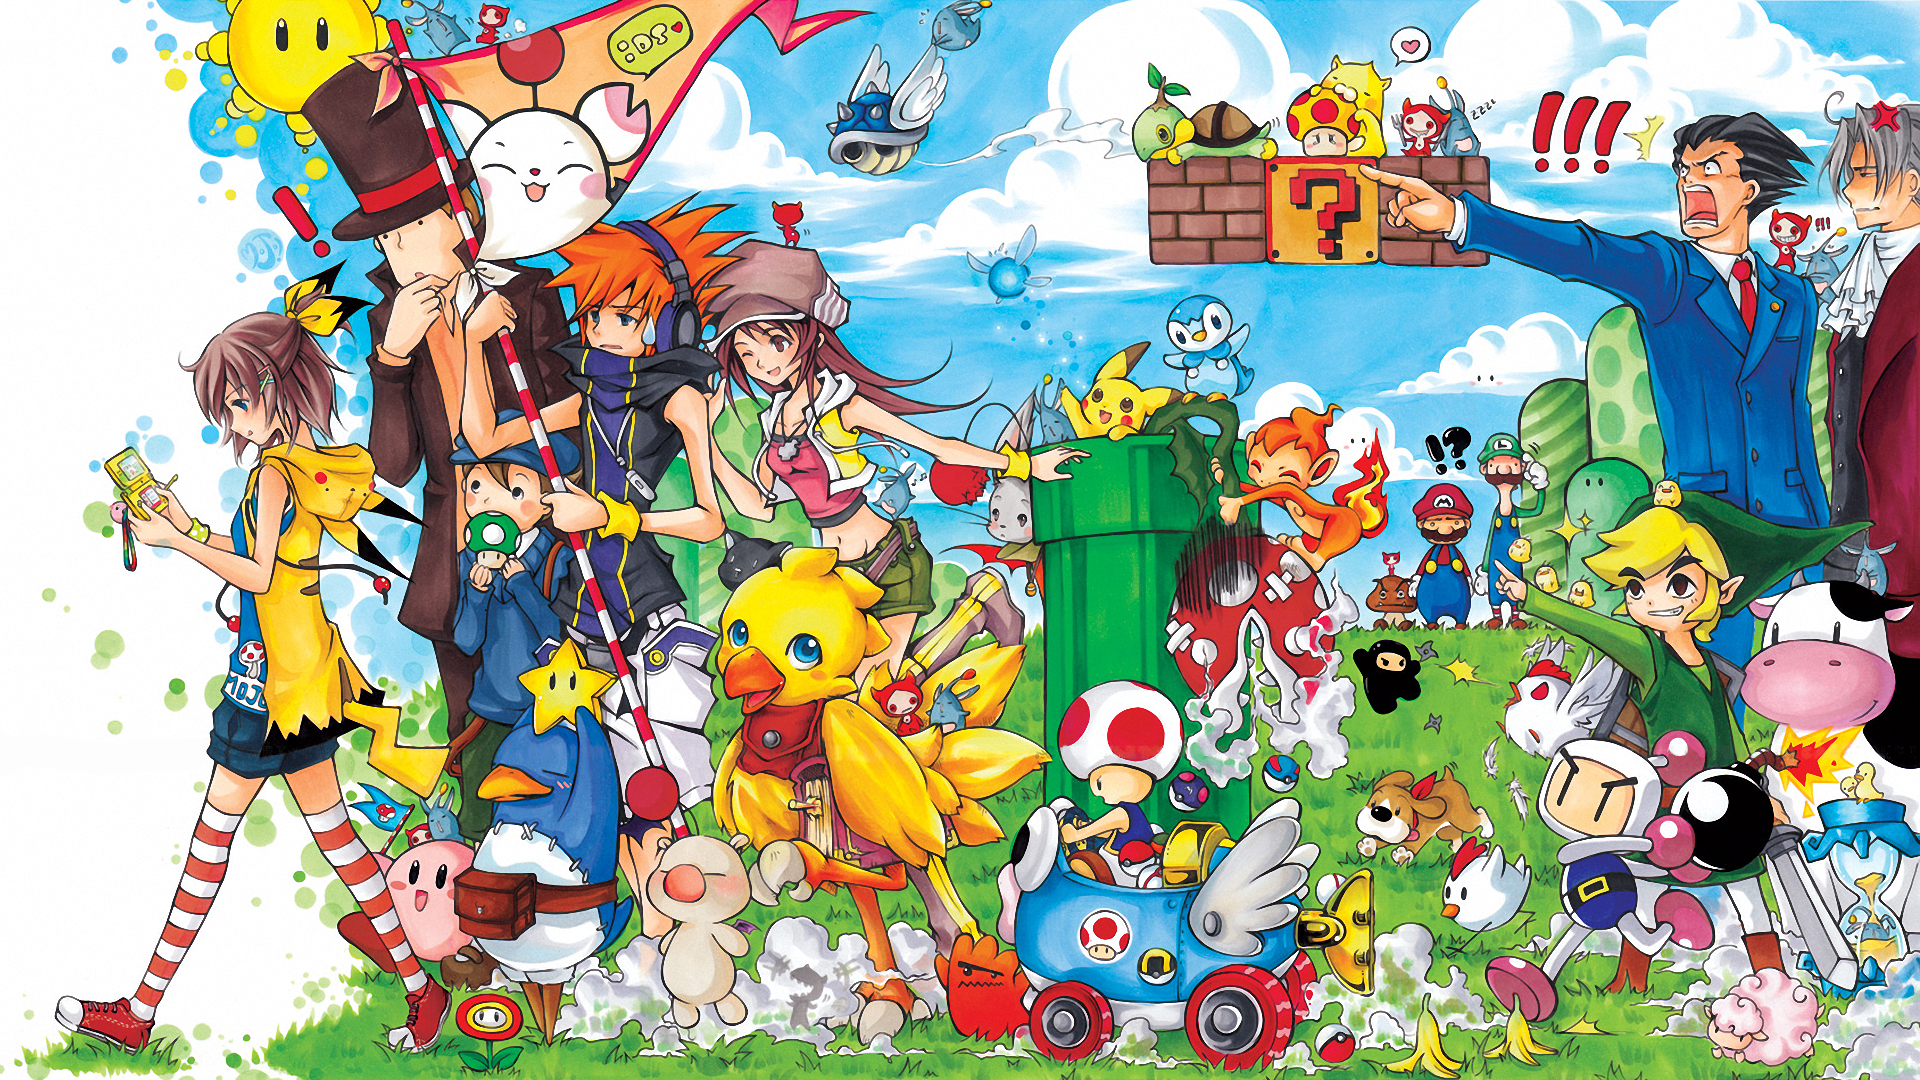 Anime 1920x1080 Mario Bros. The Legend of Zelda video games Pokémon Nintendo DS The World Ends With You Link bomberman Mario Kart ace attorney Disgaea Final Fantasy Harvest Moon Video Game Crossover